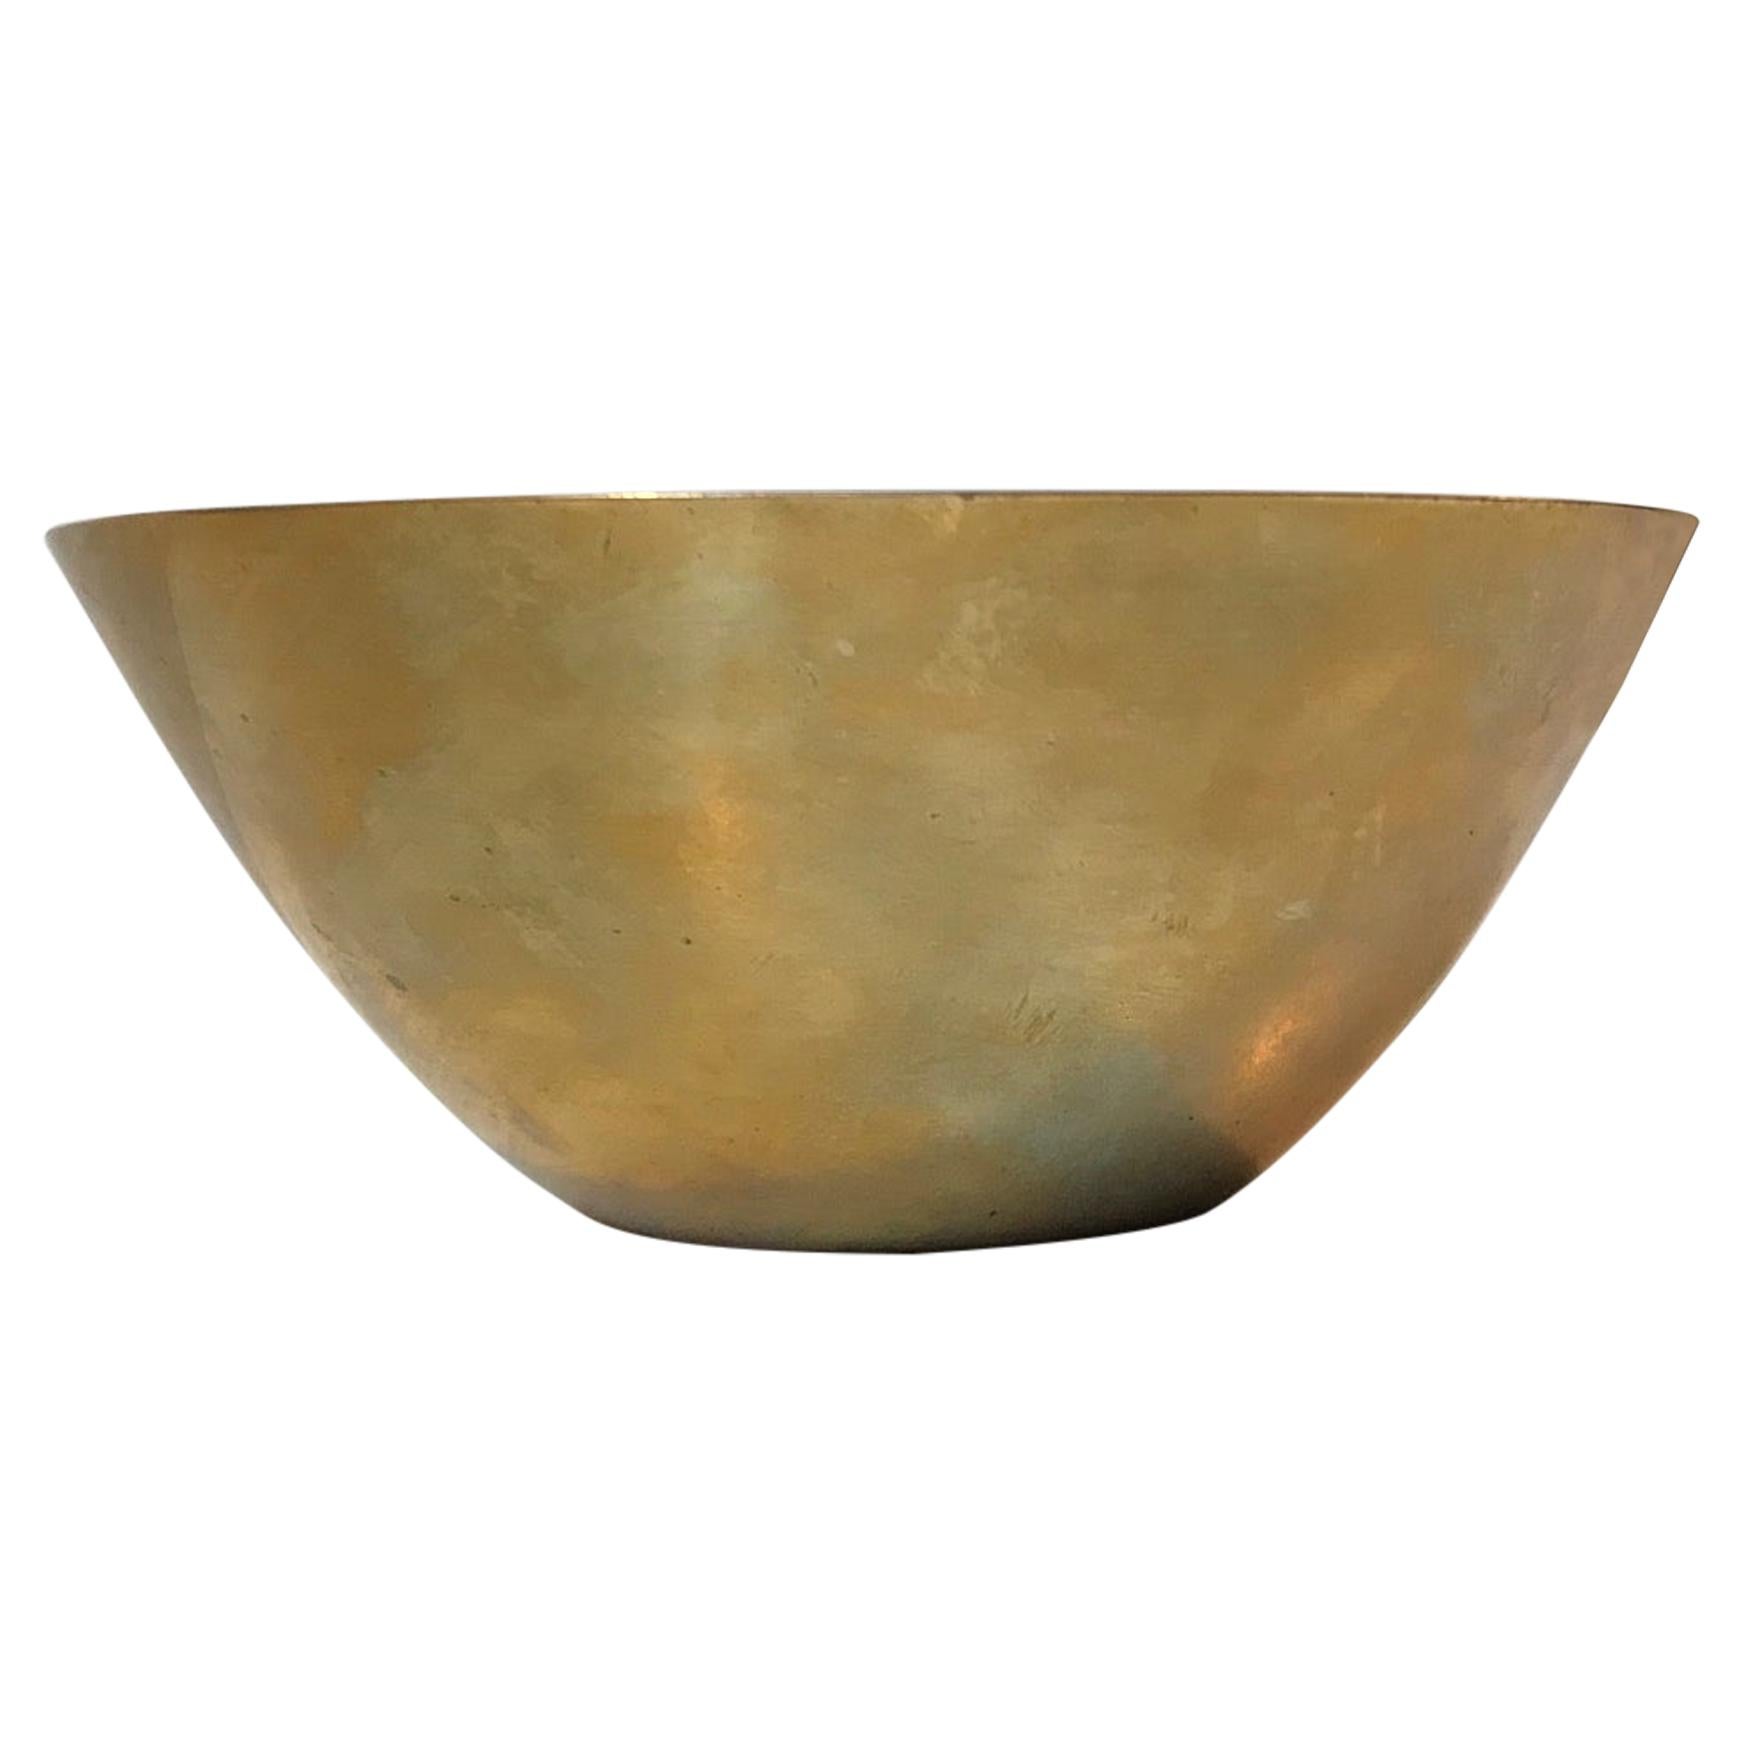 Rare Brass Bowl by Arne Jacobsen, Limited Brassware, for Stelton, 1960s For Sale